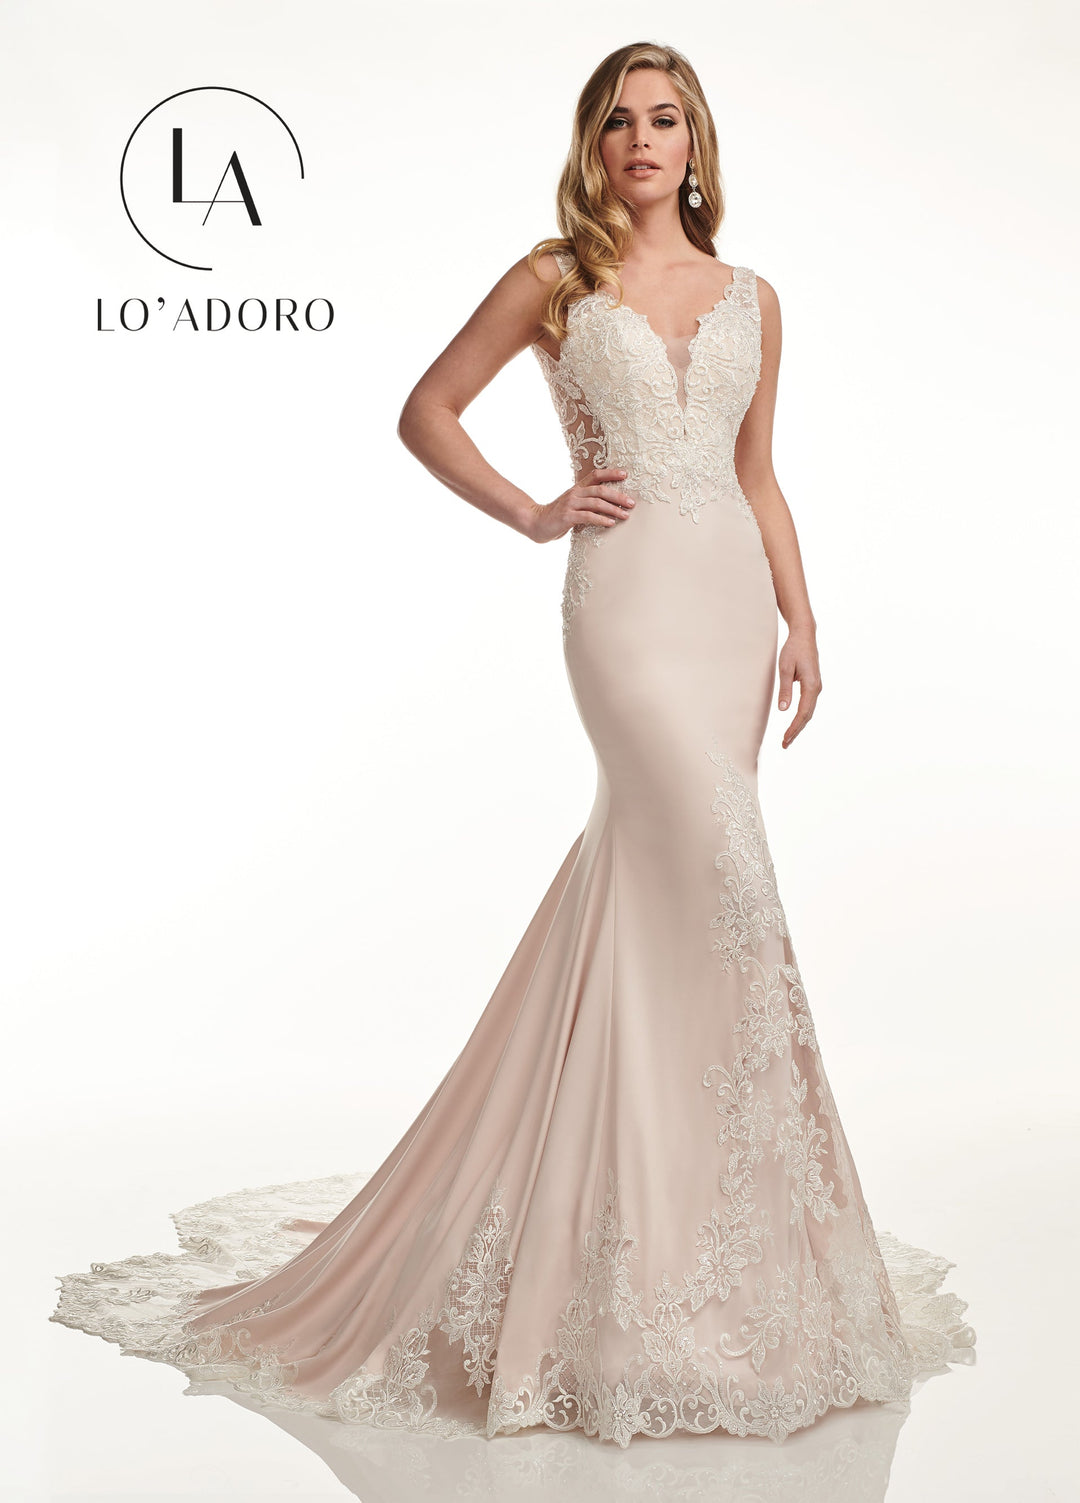 Lace Applique Crepe Mermaid Bridal Gown by Mary's Bridal M739